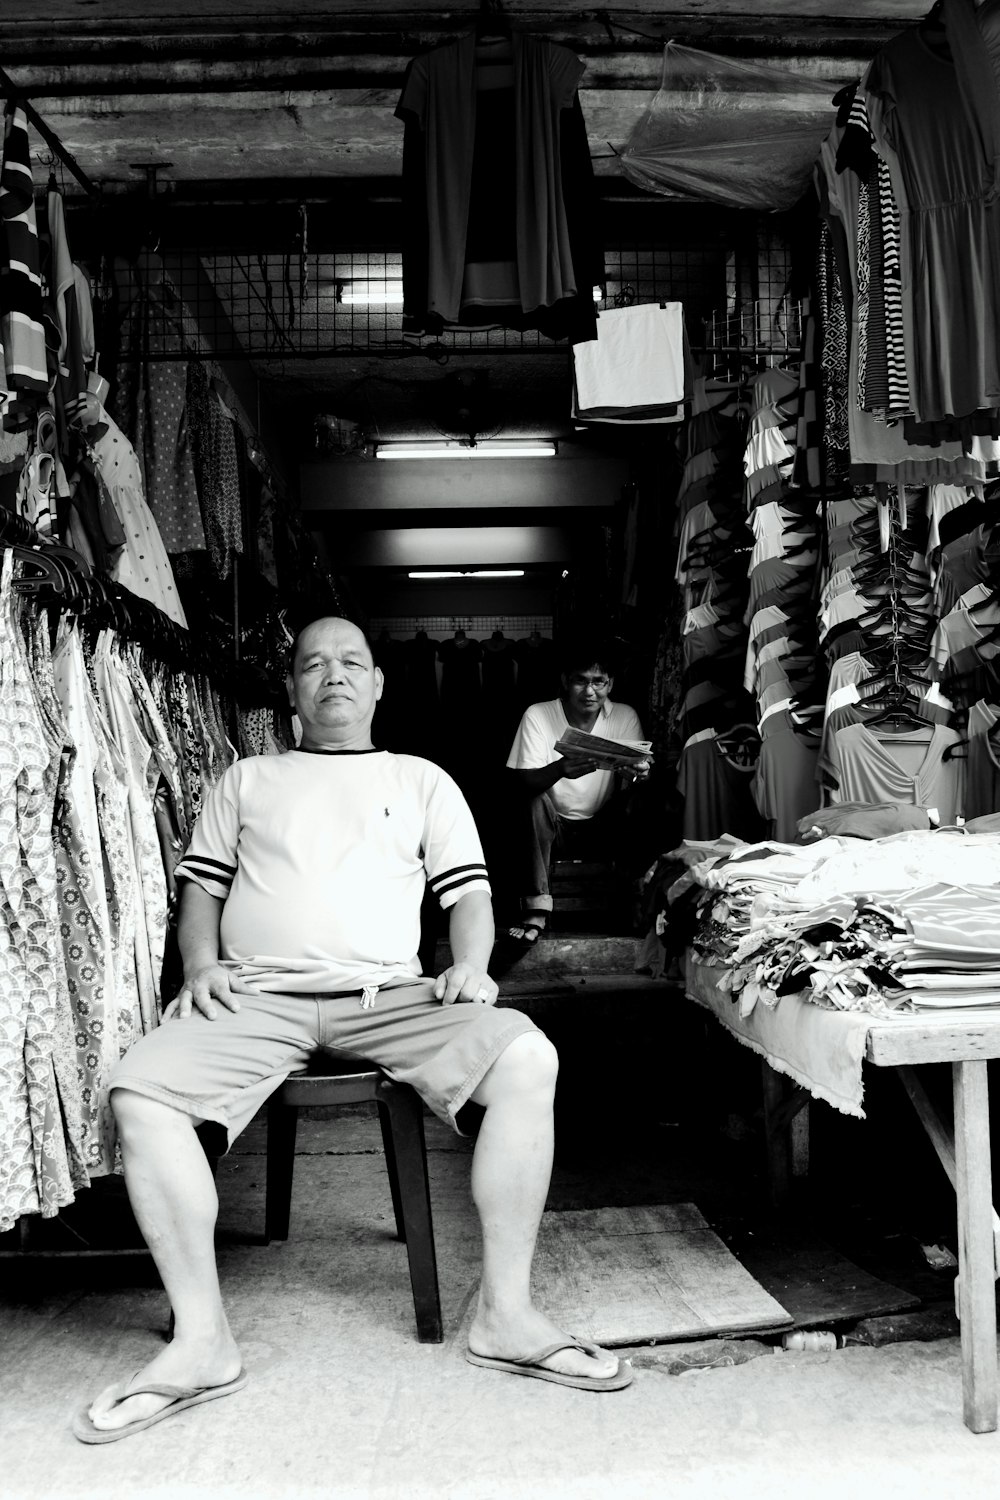 a man sitting on a chair in a store